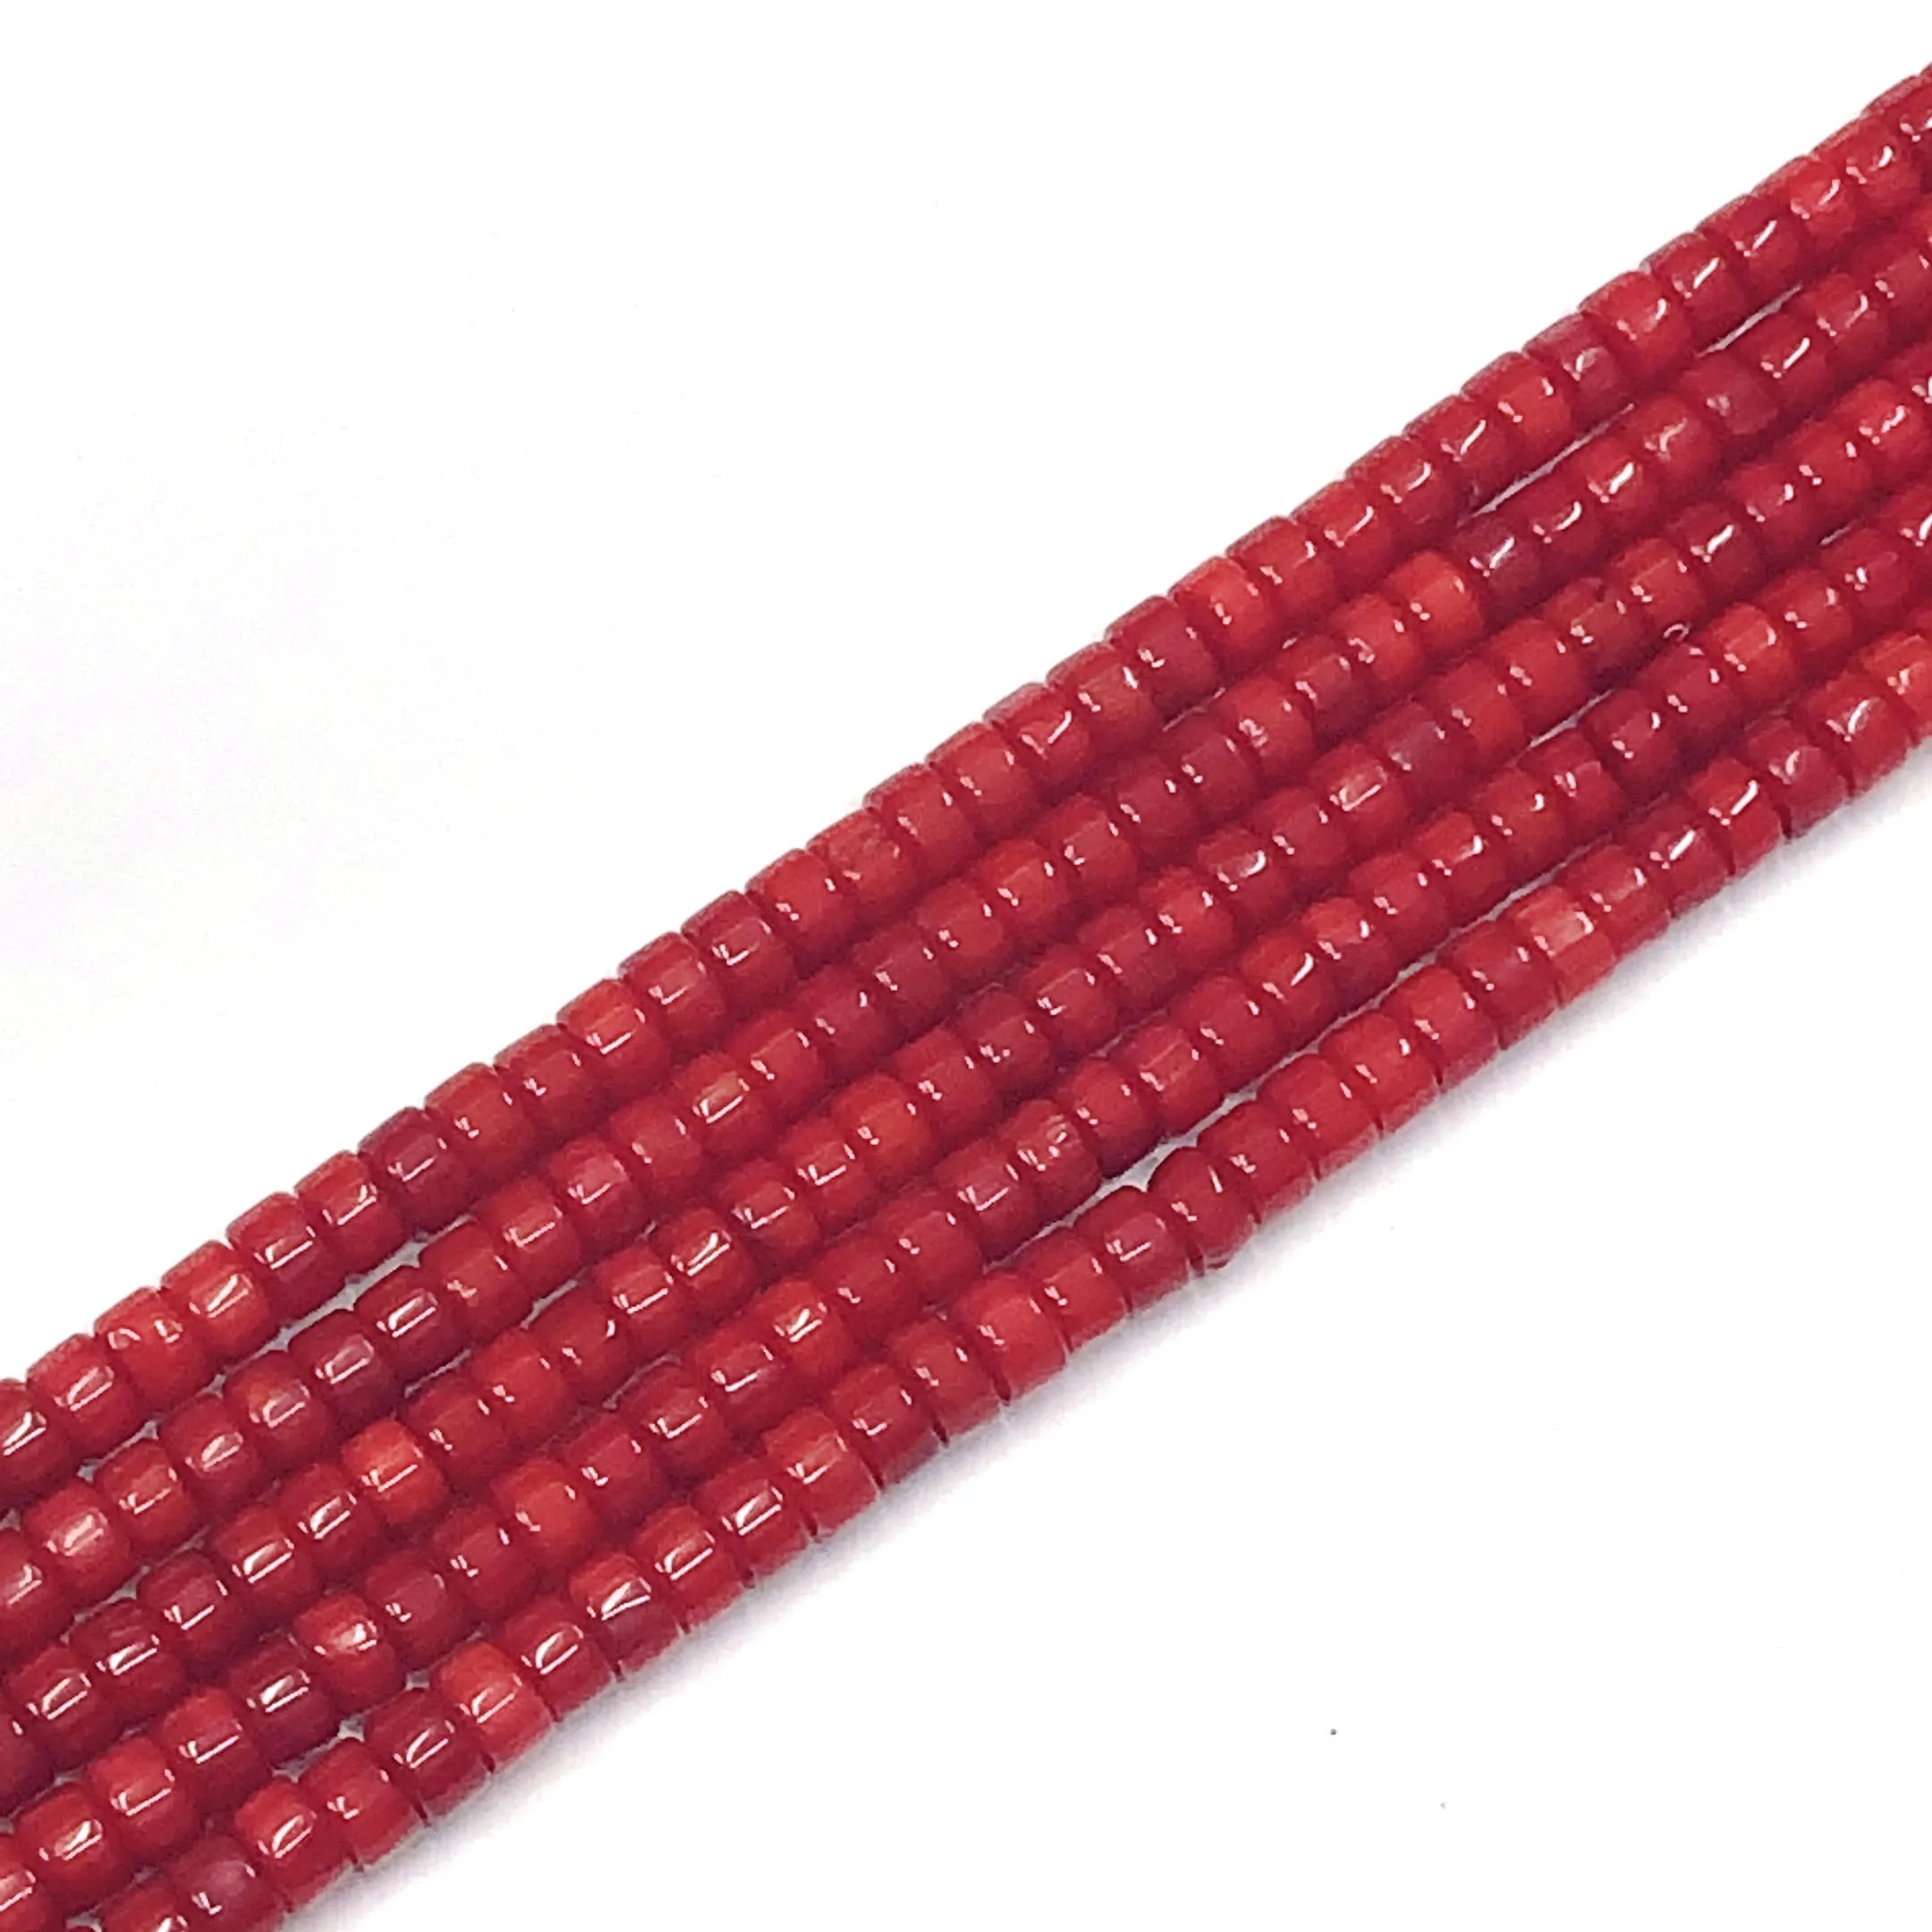 

Wholesale Natural Beads 4*6mm Red Coral Wheel Shape Gemstone in Loose Beads, 100% natural color